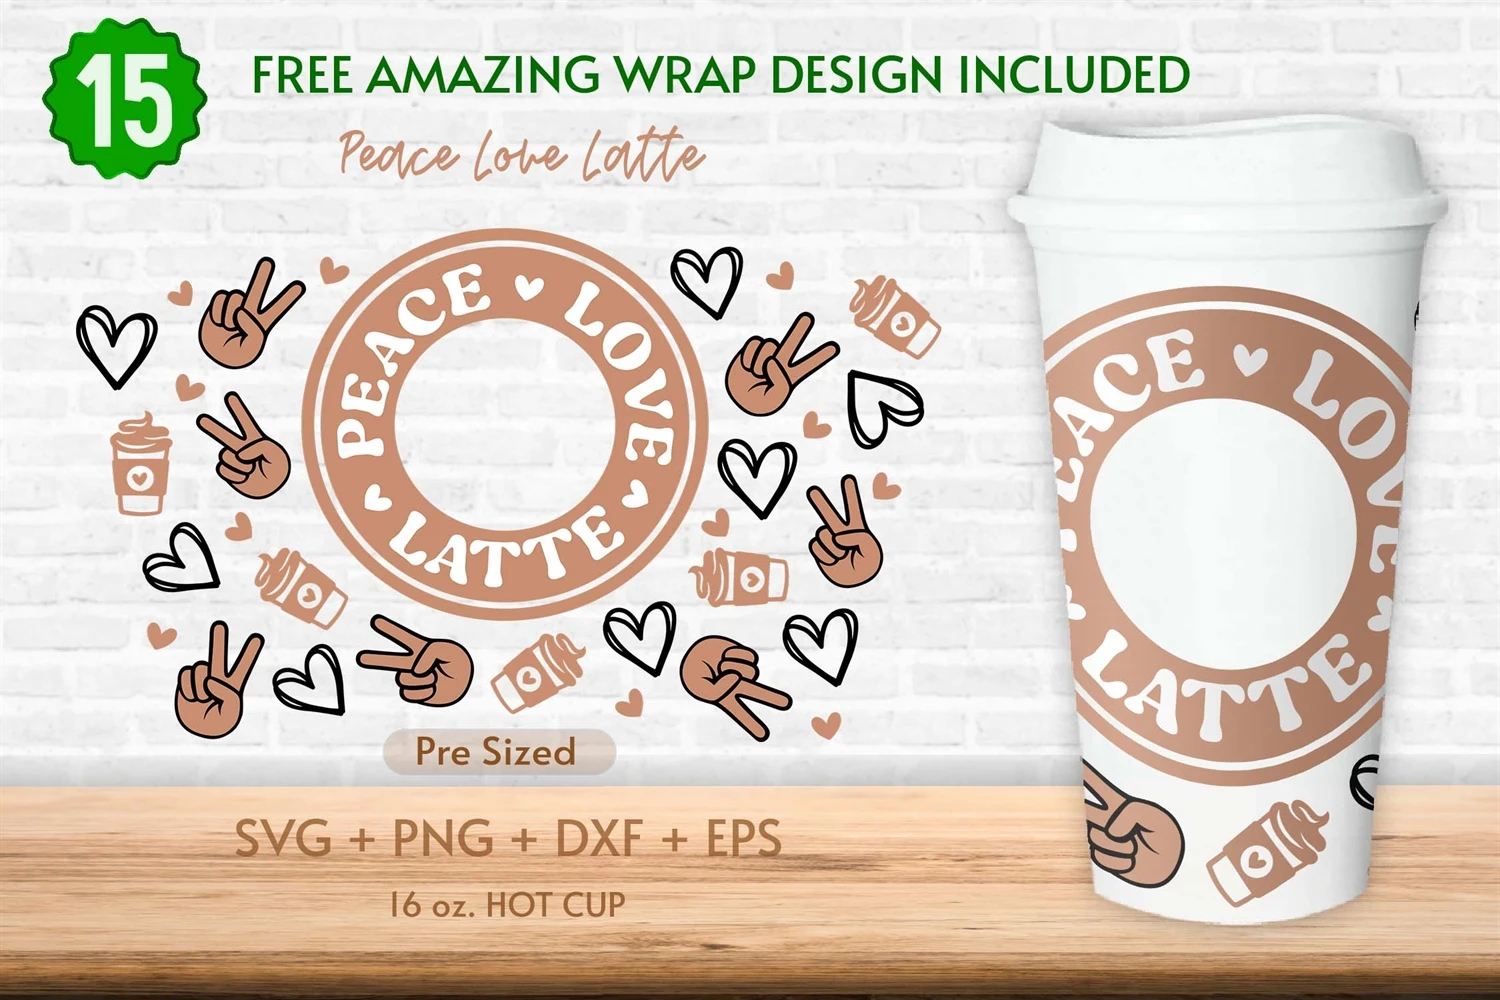 Drink Coffee Be Happy starbucks 16oz hot cup wrap SVG